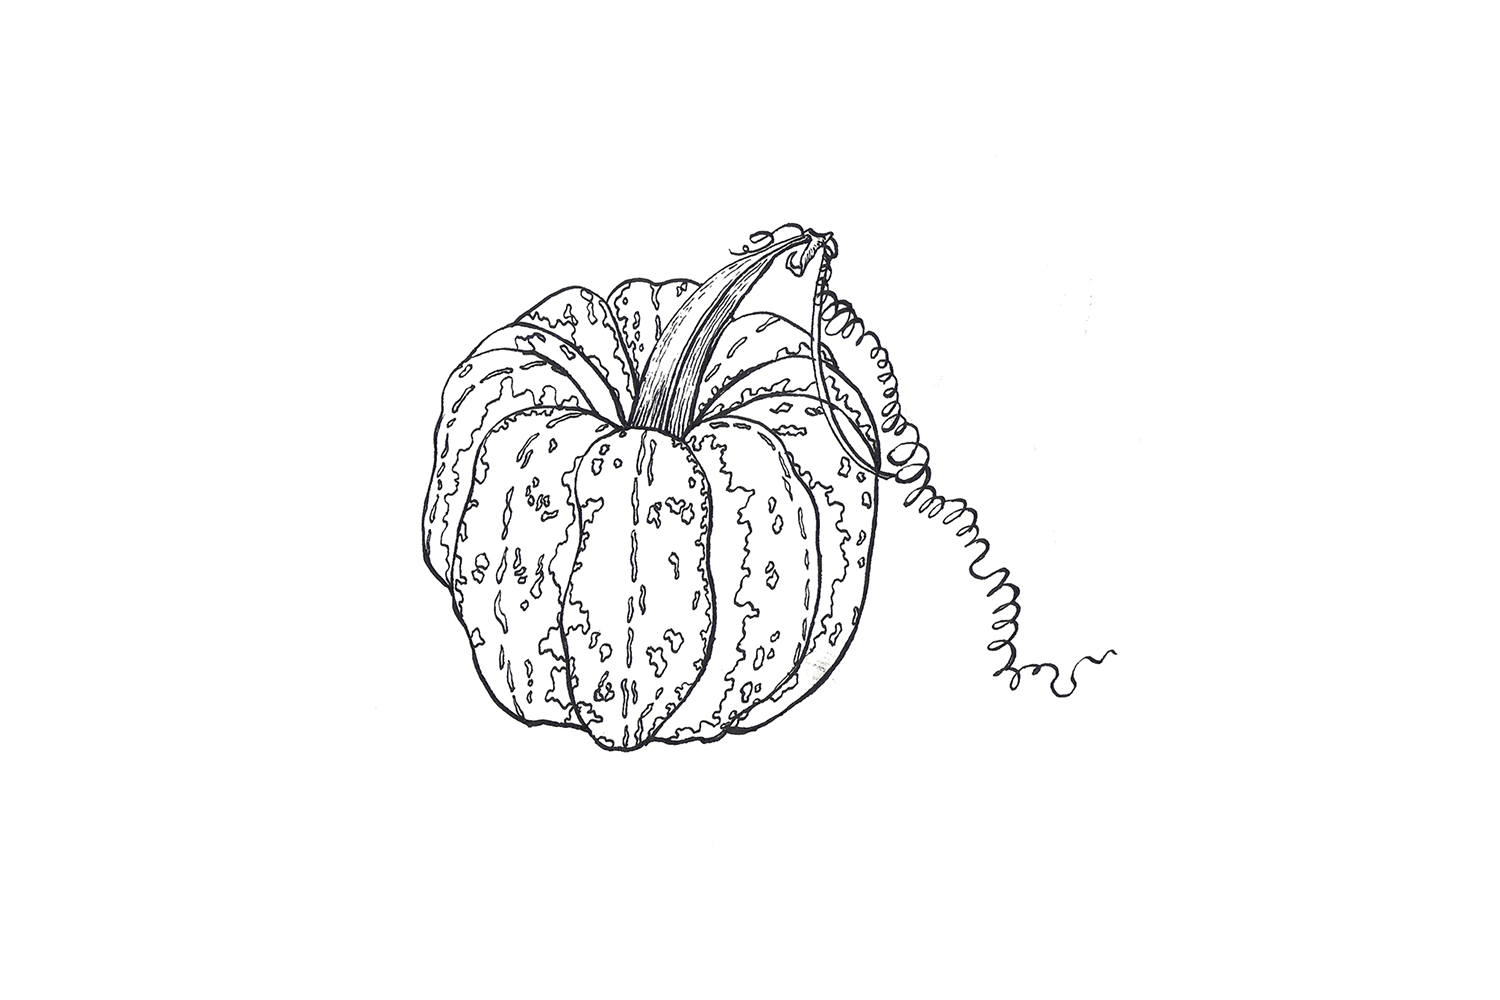 Squash, 2013, pen and ink on paper